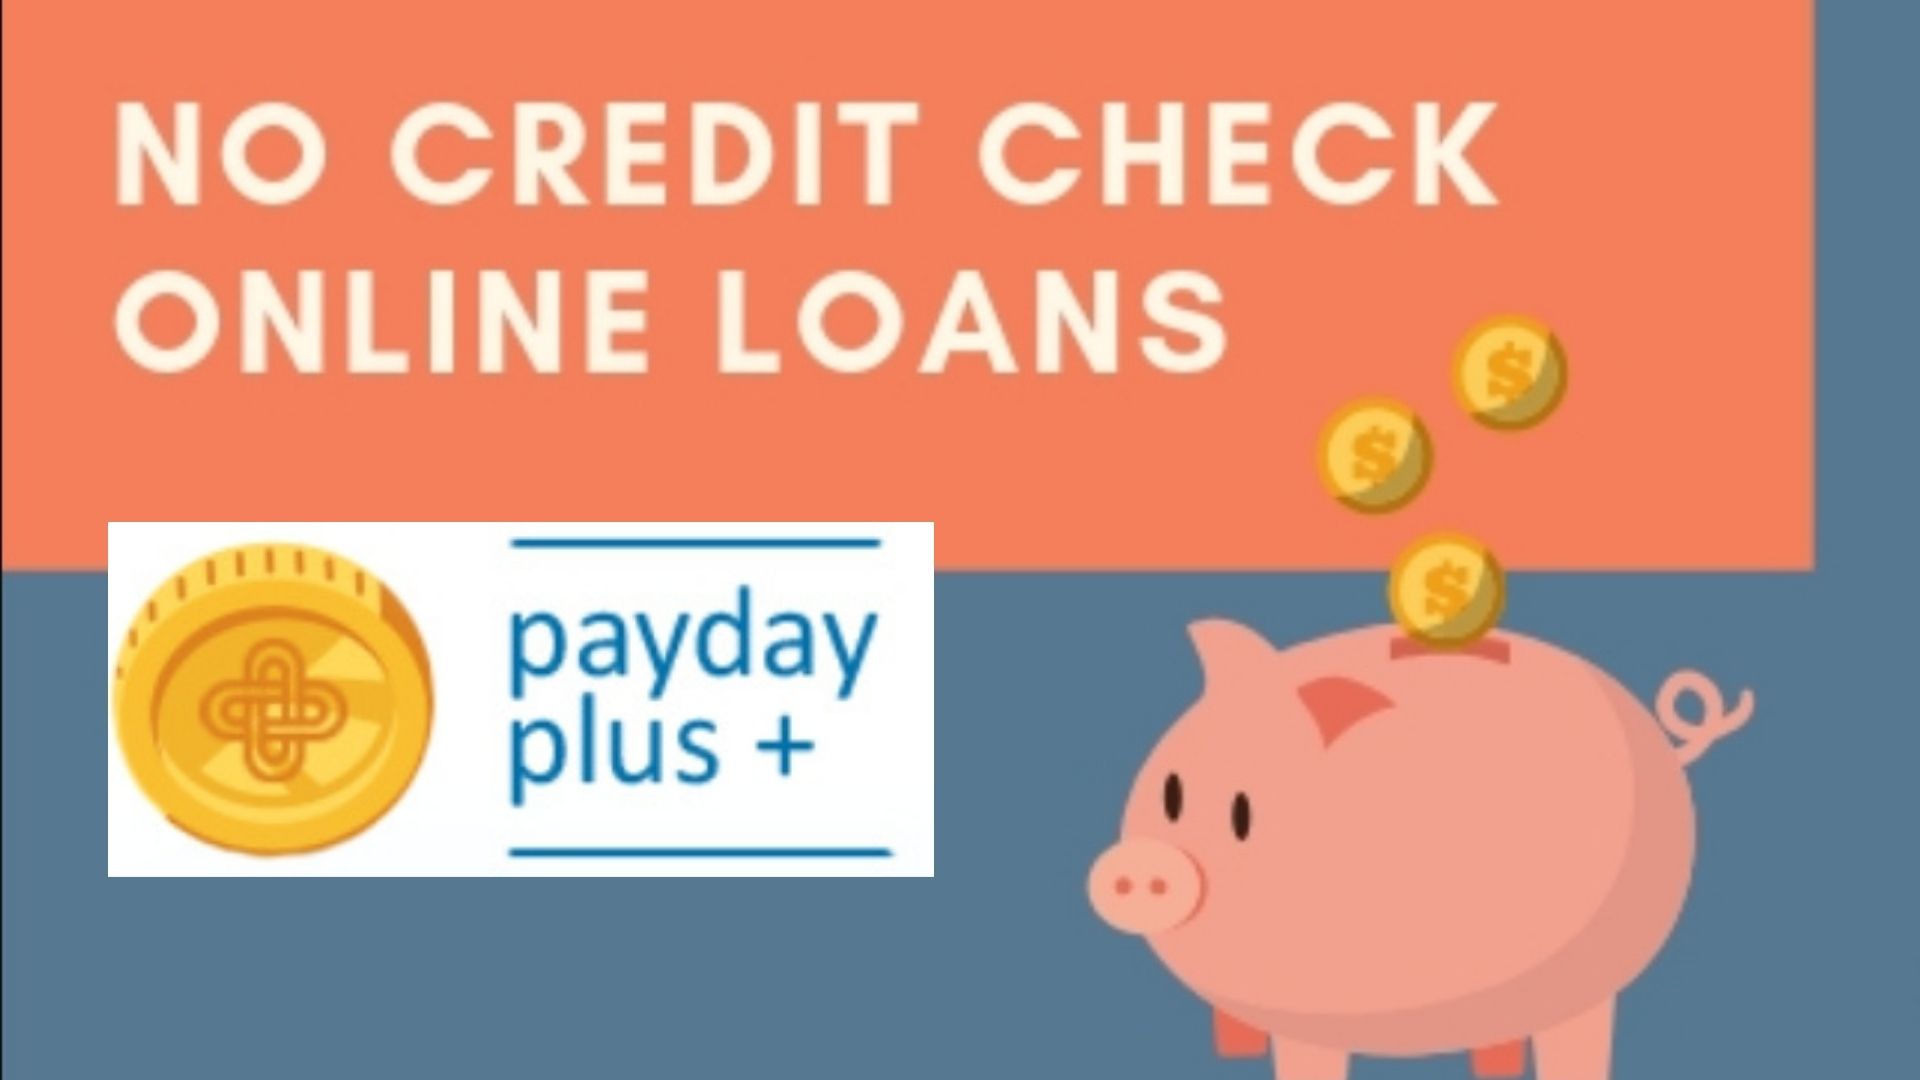 Are No Credit Check Payday Loans Real? | Payday Plus